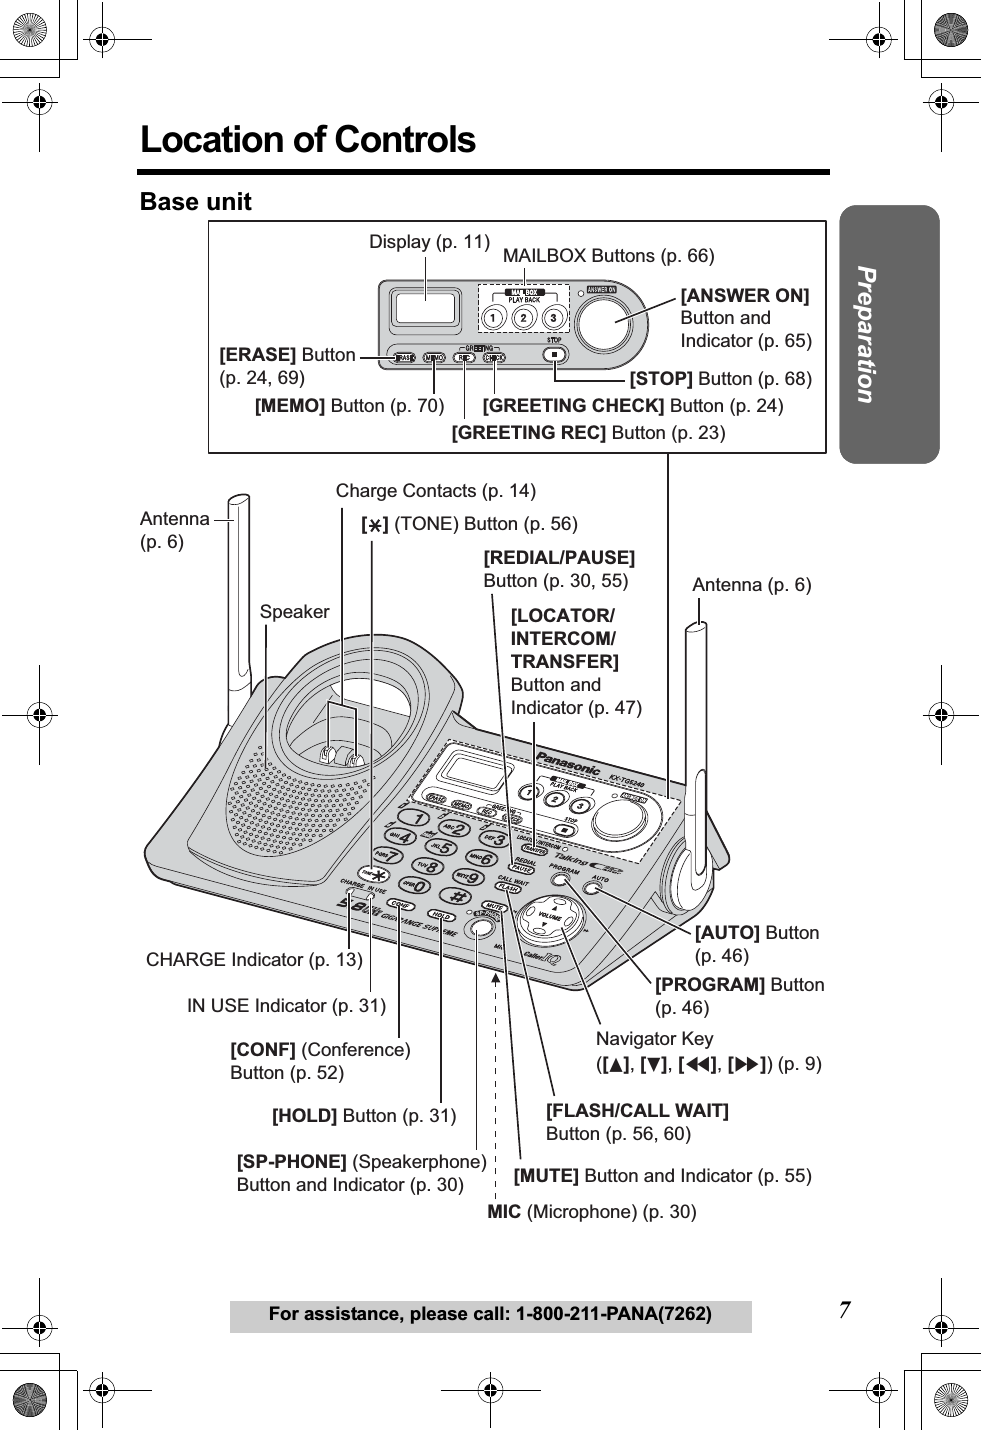 Useful InformationAnswering SystemTelephone System7For assistance, please call: 1-800-211-PANA(7262)PreparationLocation of ControlsBase unitAntenna (p. 6)Antenna(p. 6)MIC (Microphone) (p. 30)[SP-PHONE] (Speakerphone) Button and Indicator (p. 30)[HOLD] Button (p. 31) [CONF] (Conference)Button (p. 52)CHARGE Indicator (p. 13) Charge Contacts (p. 14) SpeakerNavigator Key([B],[d],[H],[G]) (p. 9)[PROGRAM] Button (p. 46)[AUTO] Button(p. 46)IN USE Indicator (p. 31)[MUTE] Button and Indicator (p. 55)[FLASH/CALL WAIT]Button (p. 56, 60)[](TONE) Button (p. 56)[LOCATOR/INTERCOM/TRANSFER]Button andIndicator (p. 47) [REDIAL/PAUSE]Button (p. 30, 55)Display (p. 11)[STOP] Button (p. 68)[GREETING REC] Button (p. 23)[MEMO] Button (p. 70)[ERASE] Button(p. 24, 69)[ANSWER ON] Button and Indicator (p. 65) MAILBOX Buttons (p. 66)[GREETING CHECK] Button (p. 24)